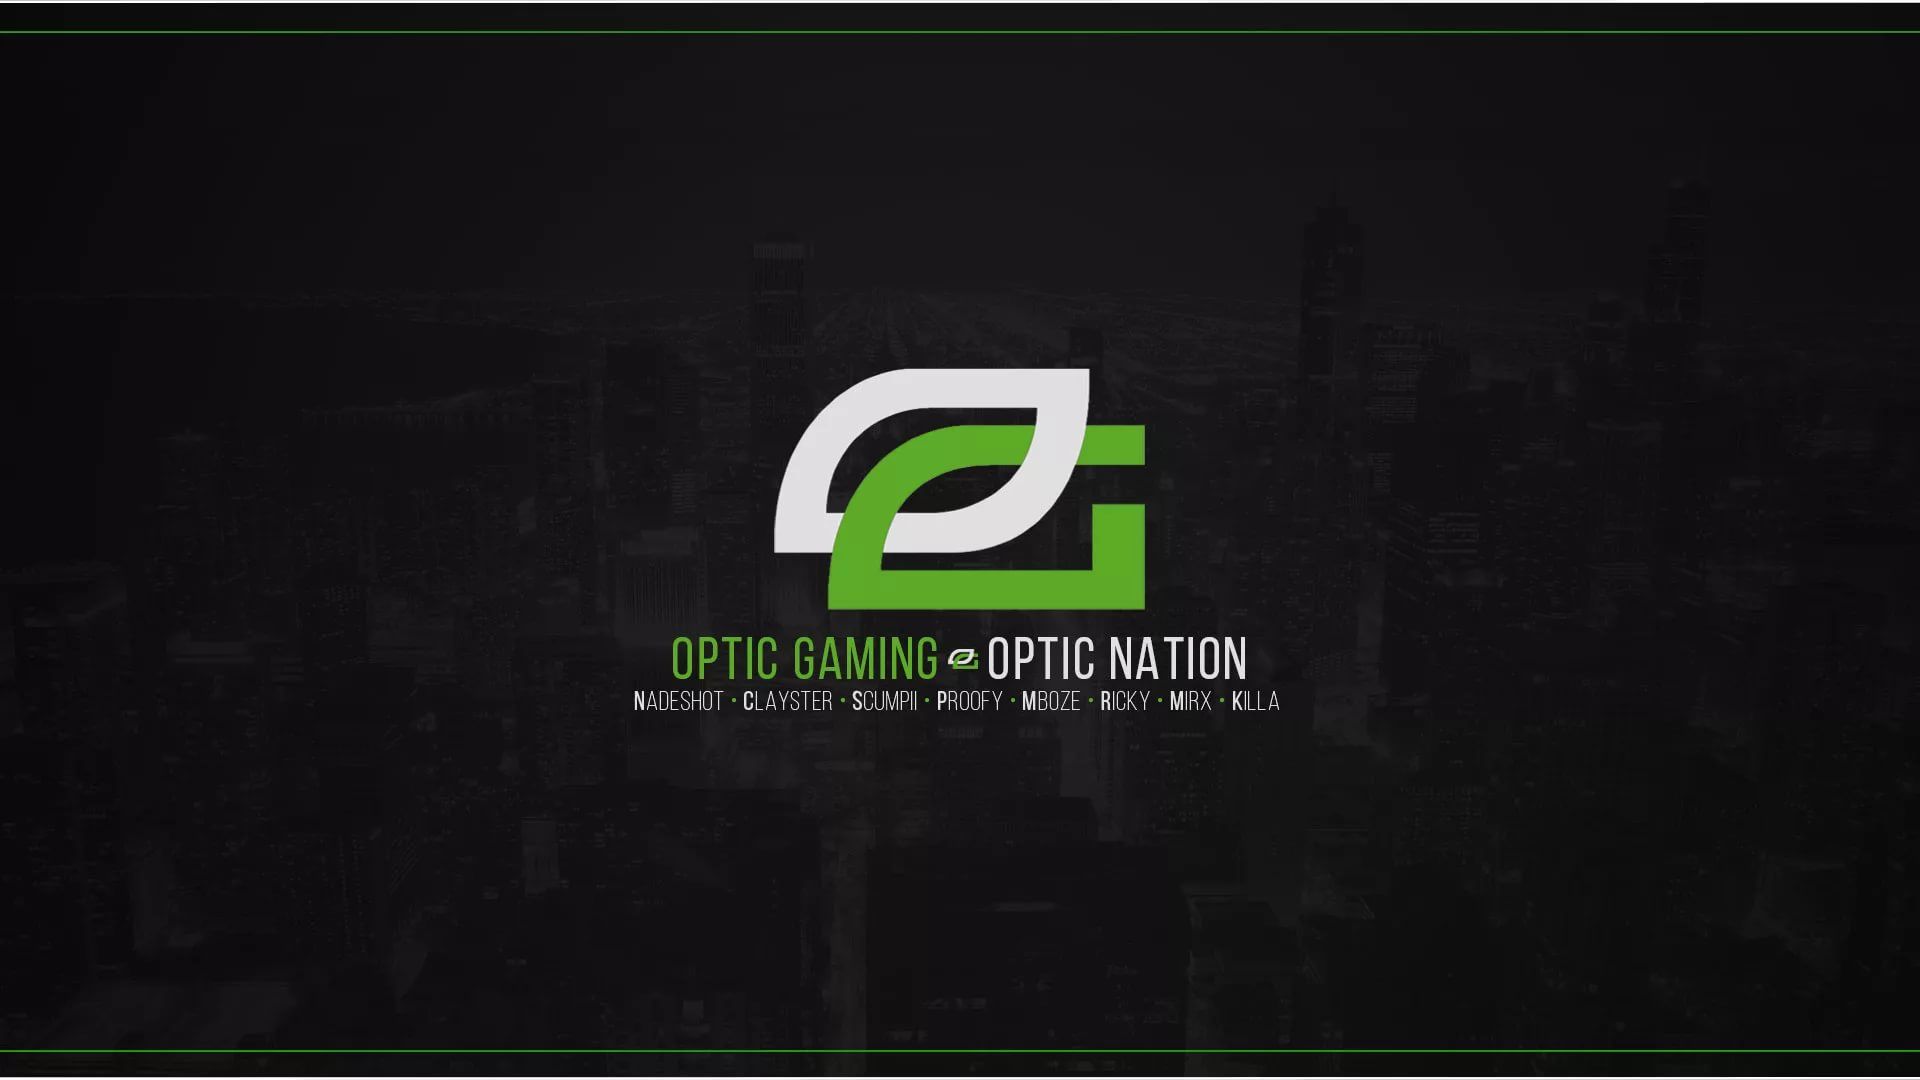 Optic Gaming download free wallpapers for pc in hd